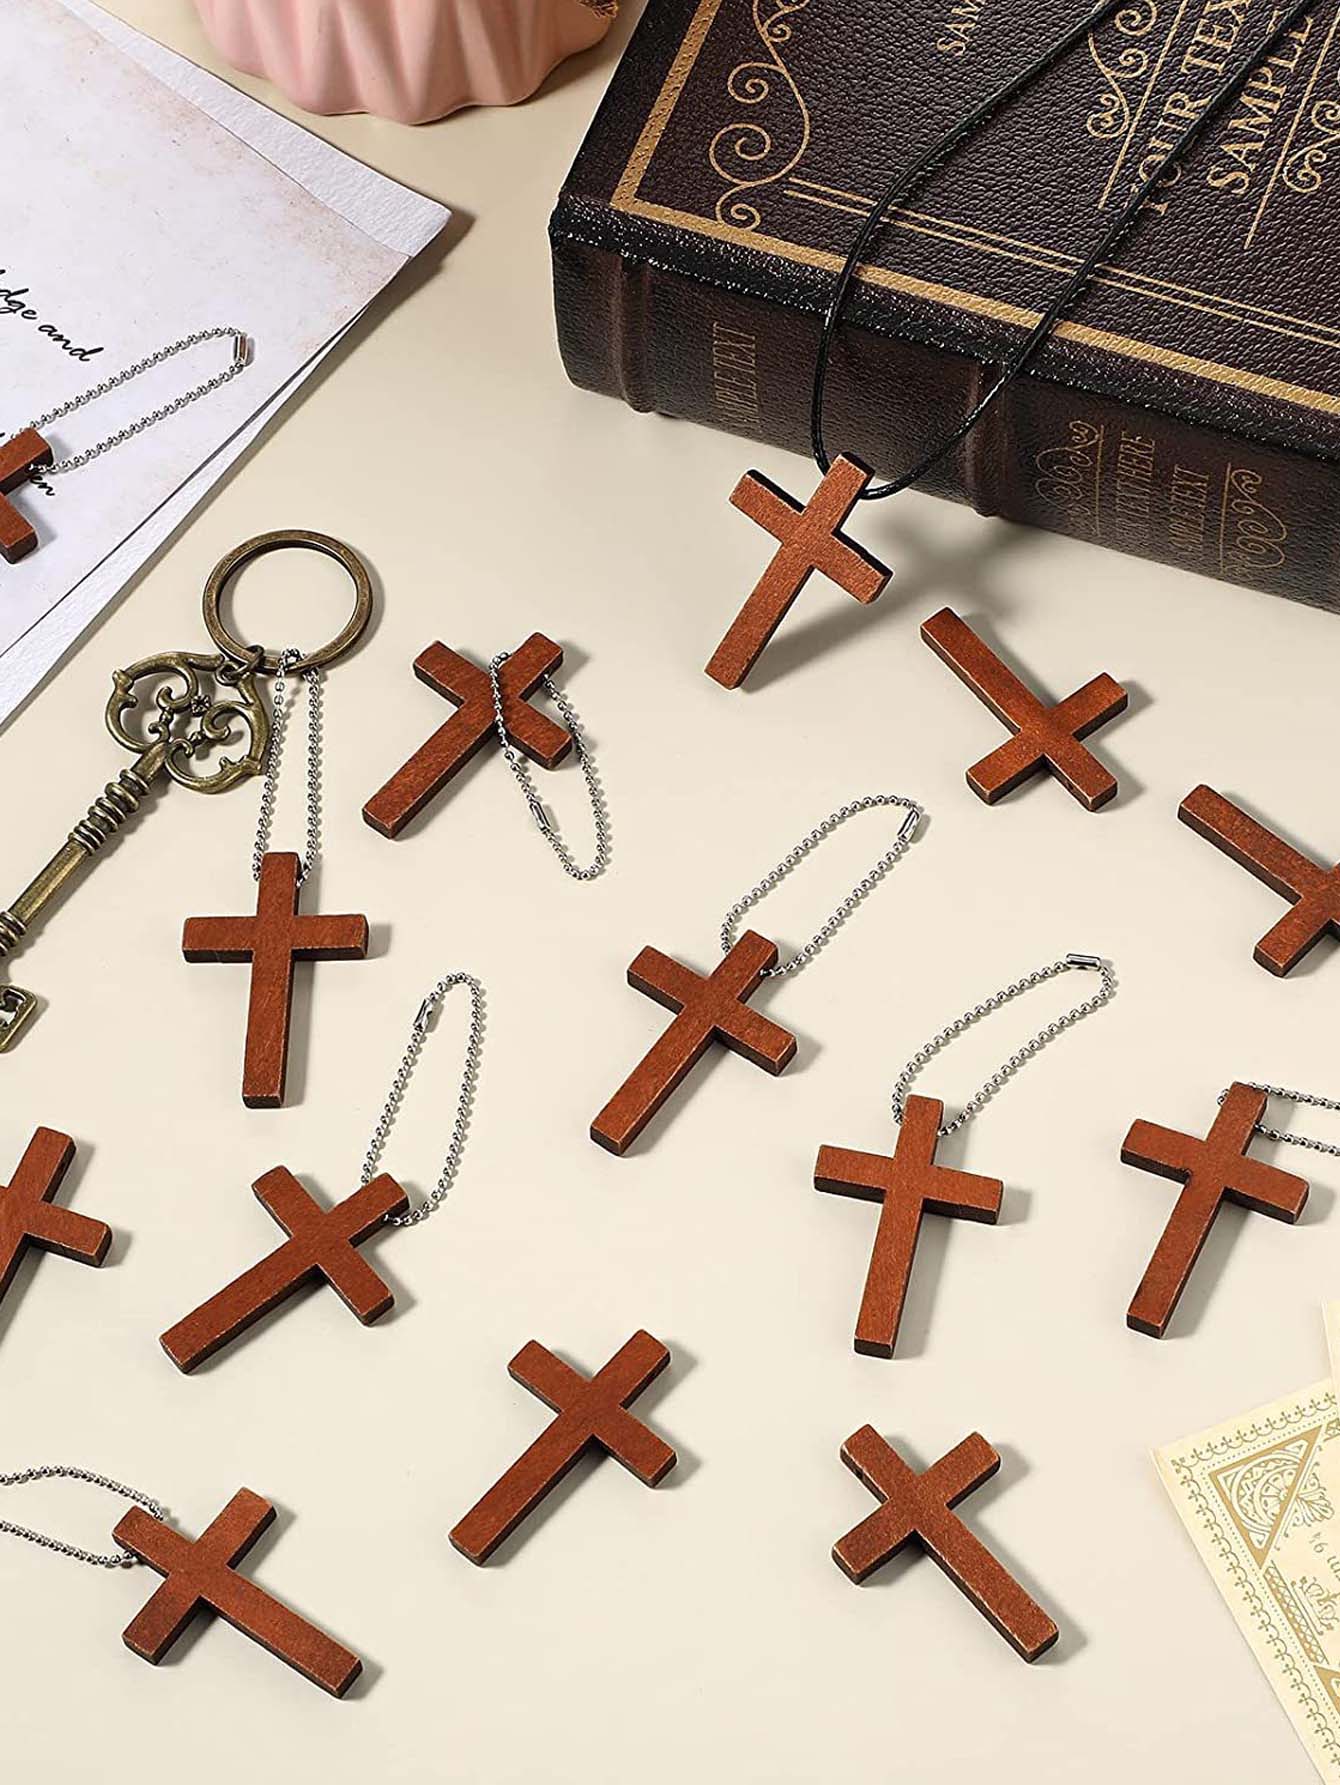 DIY Wood Mini Crosses 10 PC Set for Crafts or Jewelry Making 💜